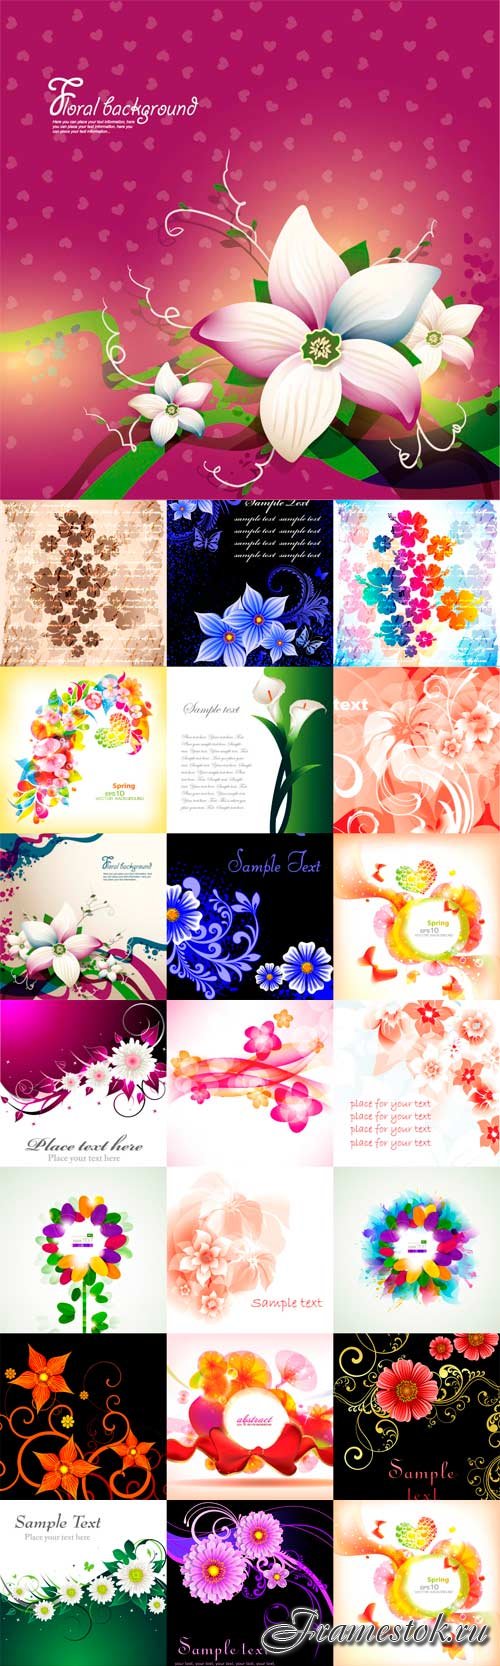 Vector beautiful flowers backgrounds - 2